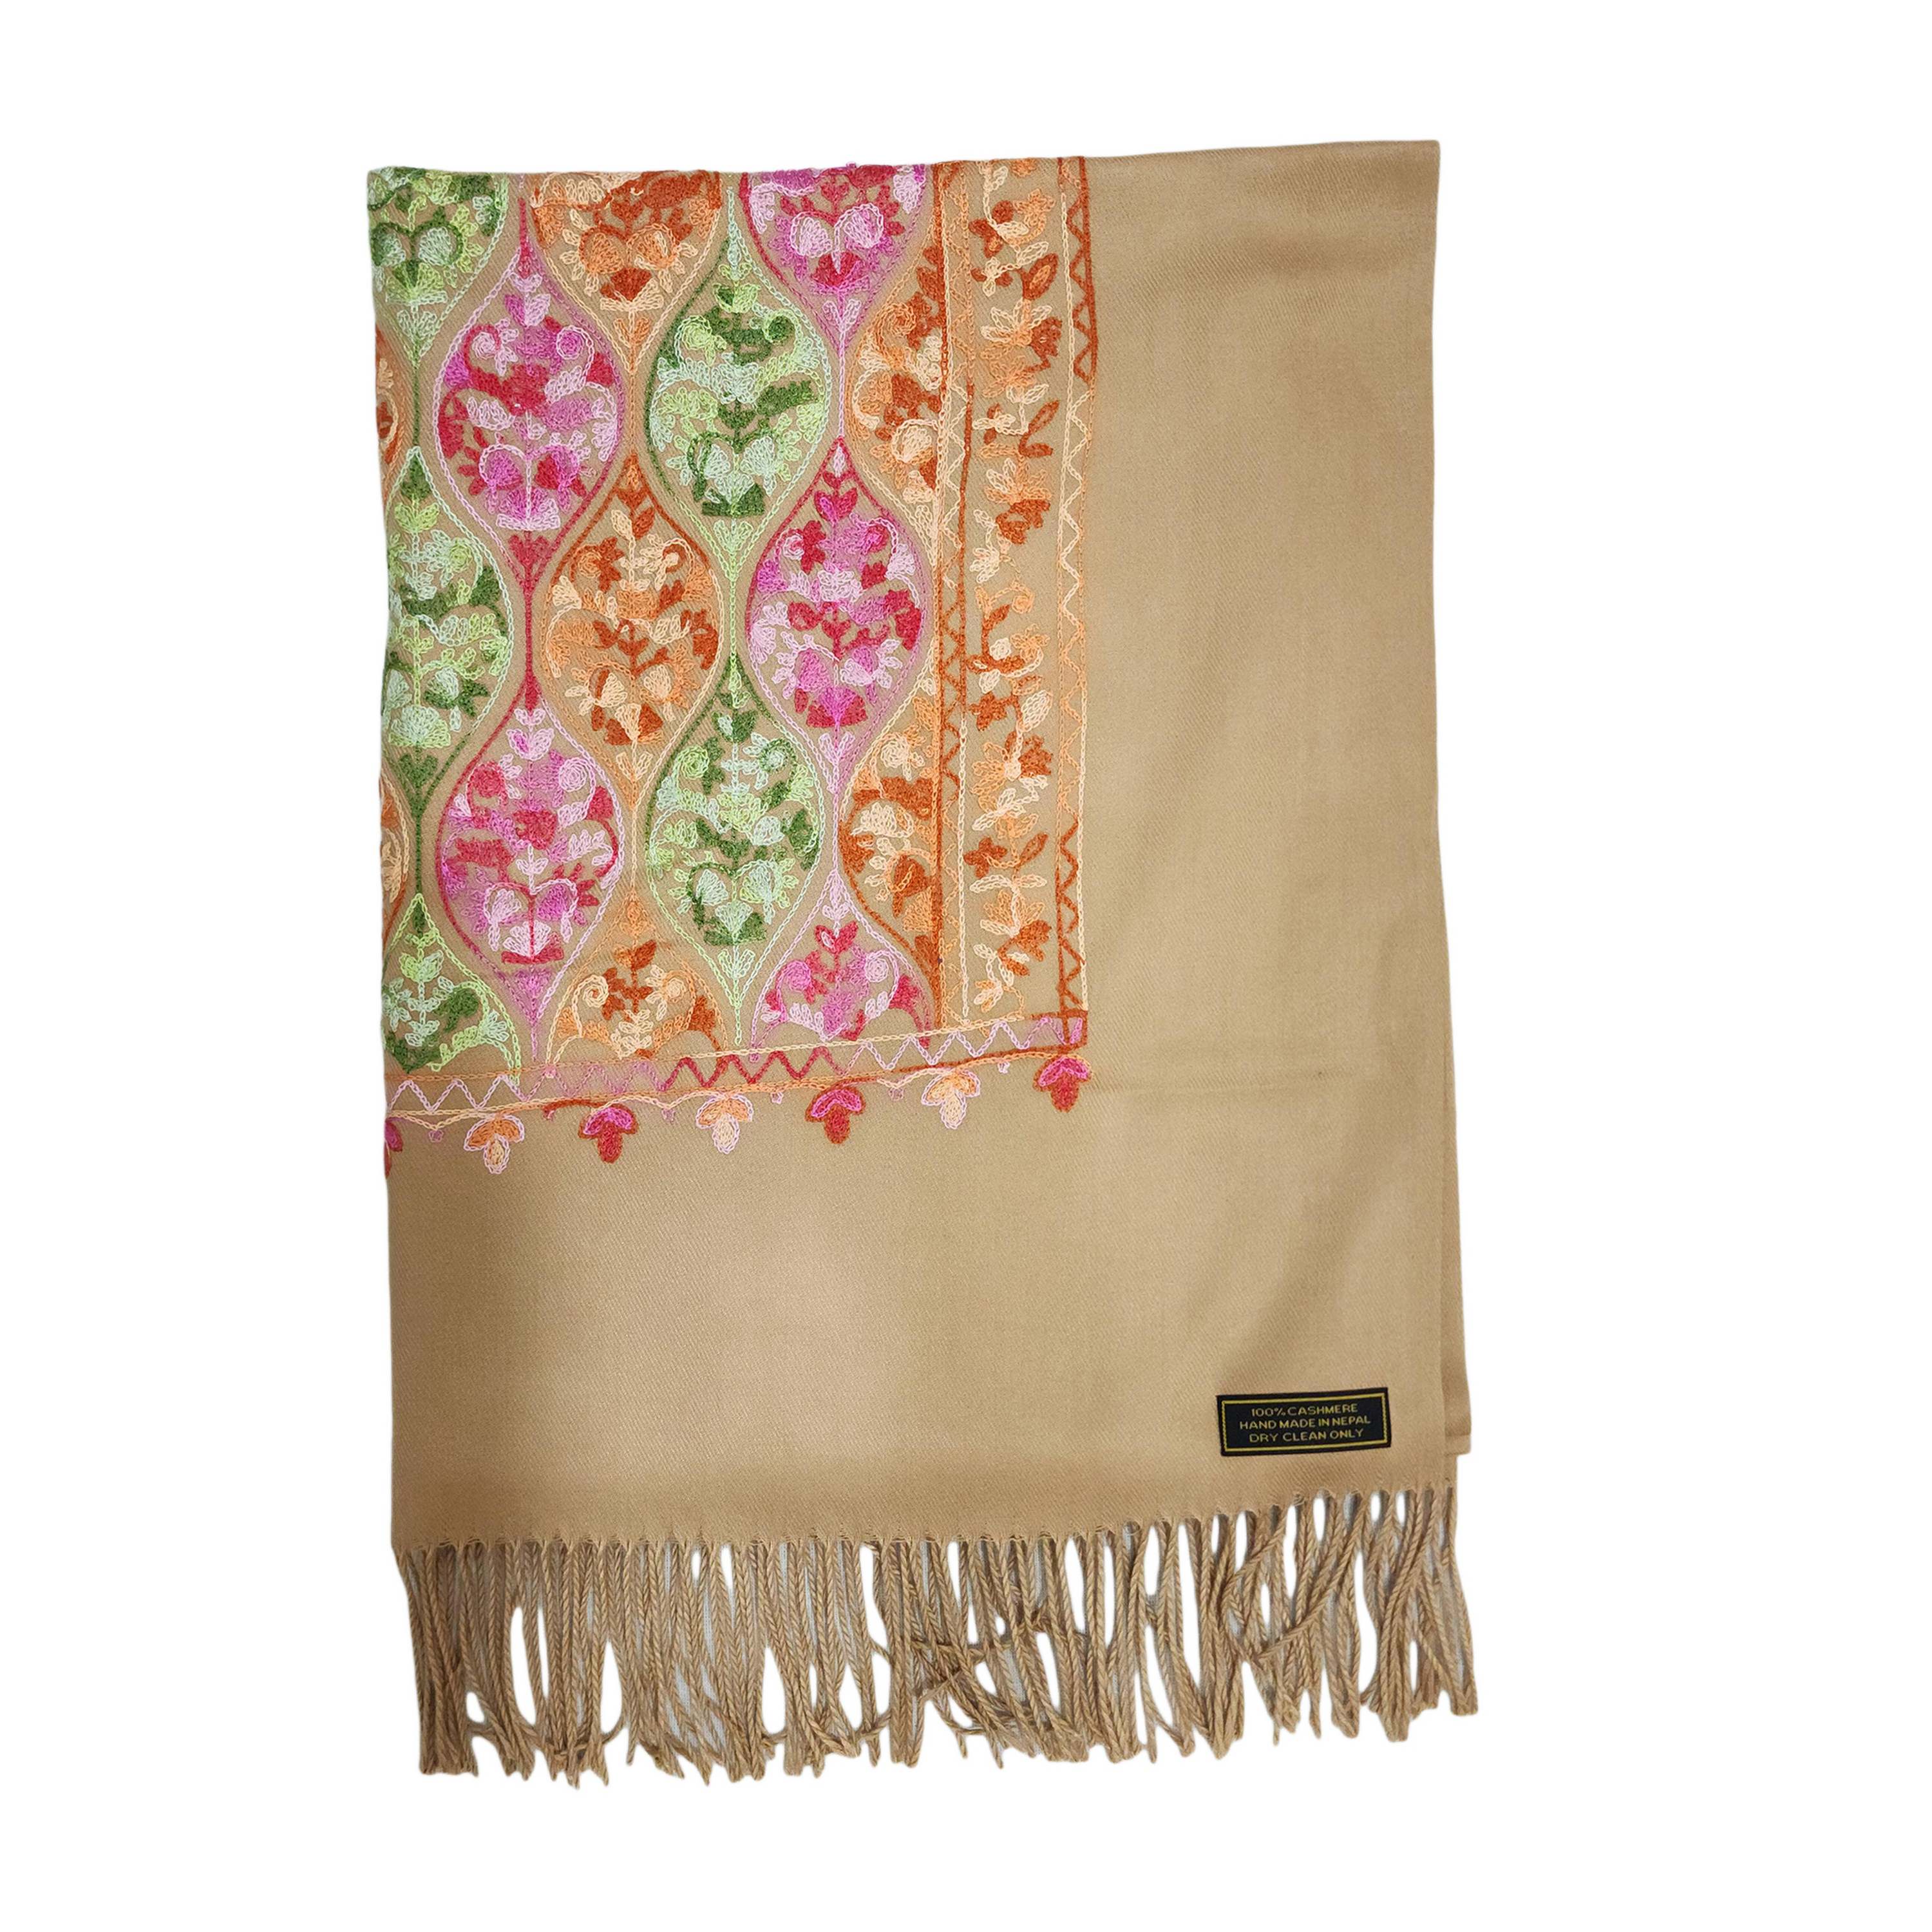 Desigener Shawl, Thick Nepali Shawl, With Heavy Embroidery, Color brown